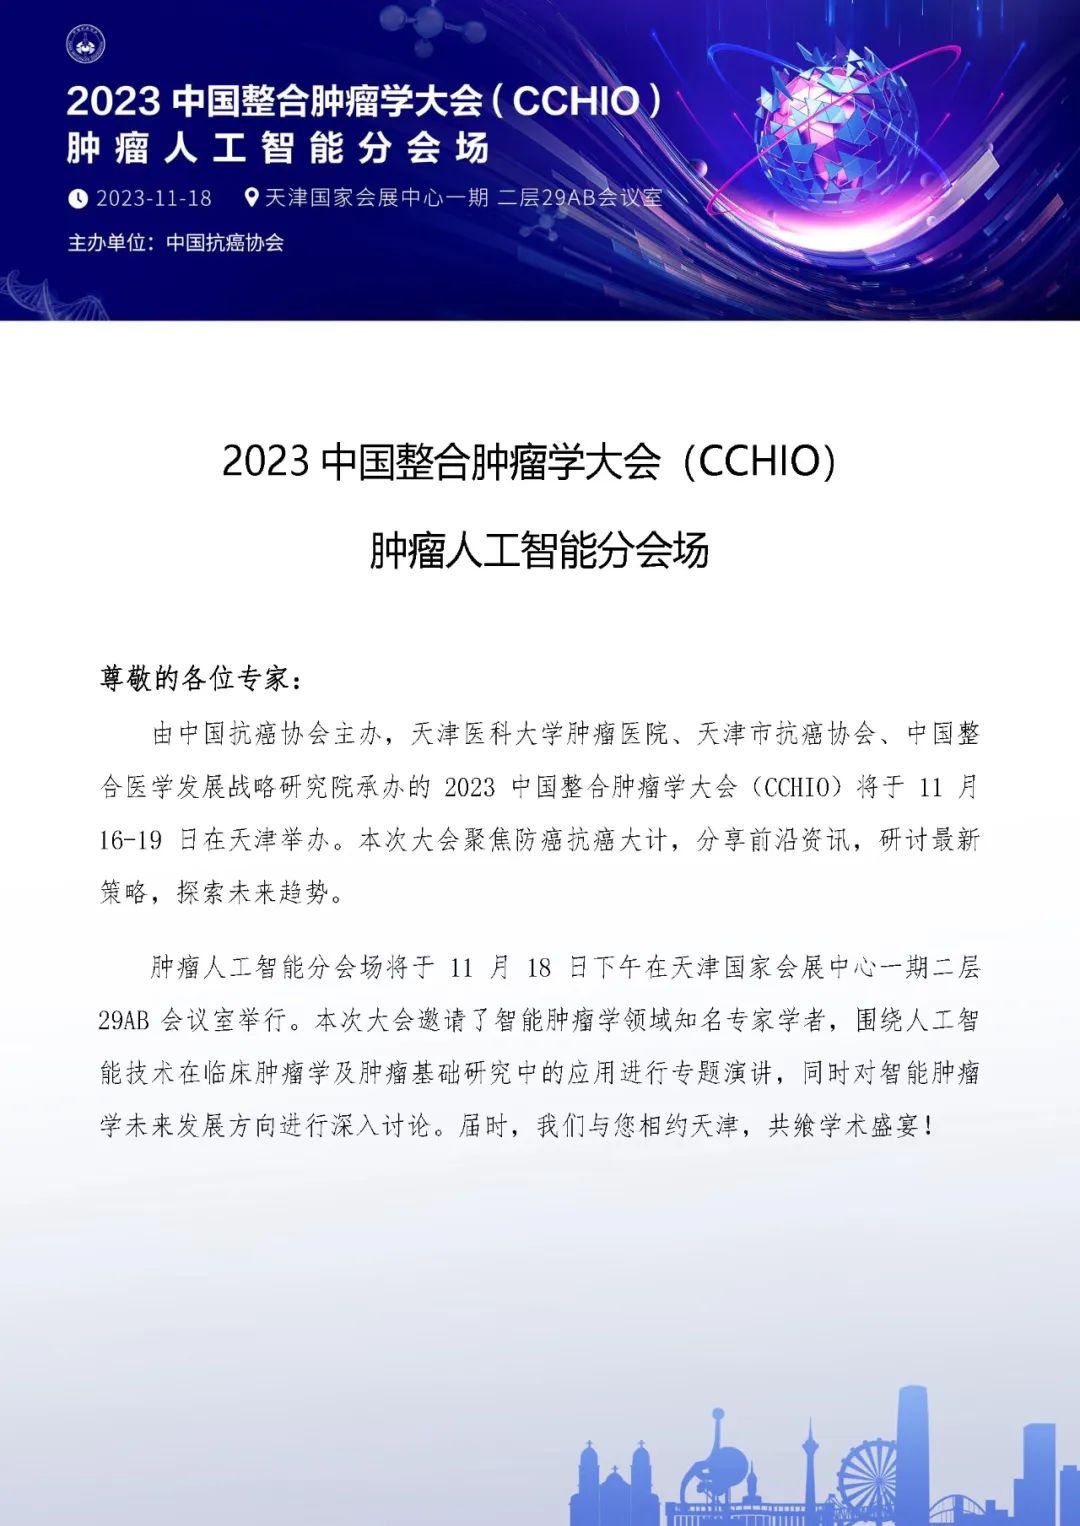 2023 CCHIO | 会议点播——<font color="red">肿瘤</font><font color="red">人工智能</font>分会场